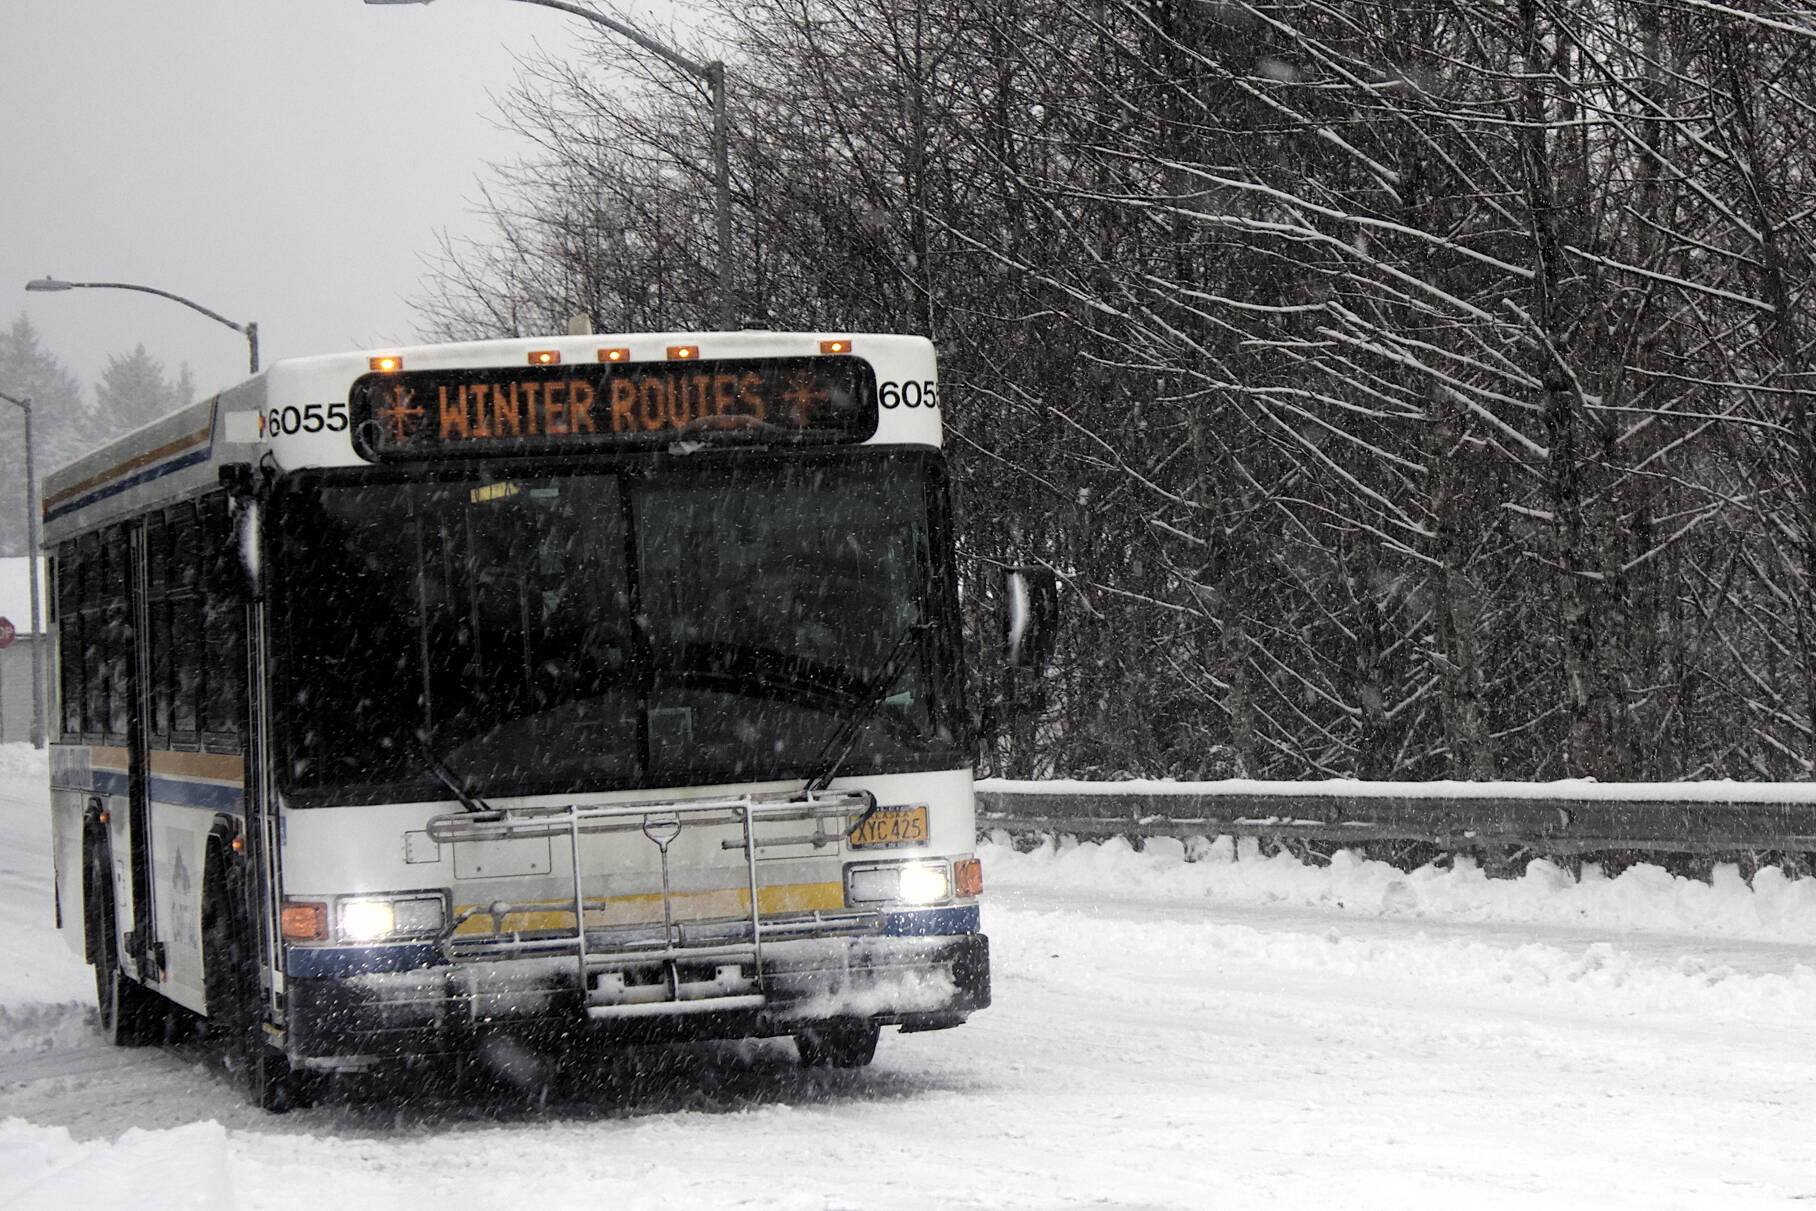 A Capital Transit bus advises riders winter routes are in effect Thursday as the first heavy snowfall of the season limits service to some difficult-to-access streets. (Mark Sabbatini / Juneau Empire)